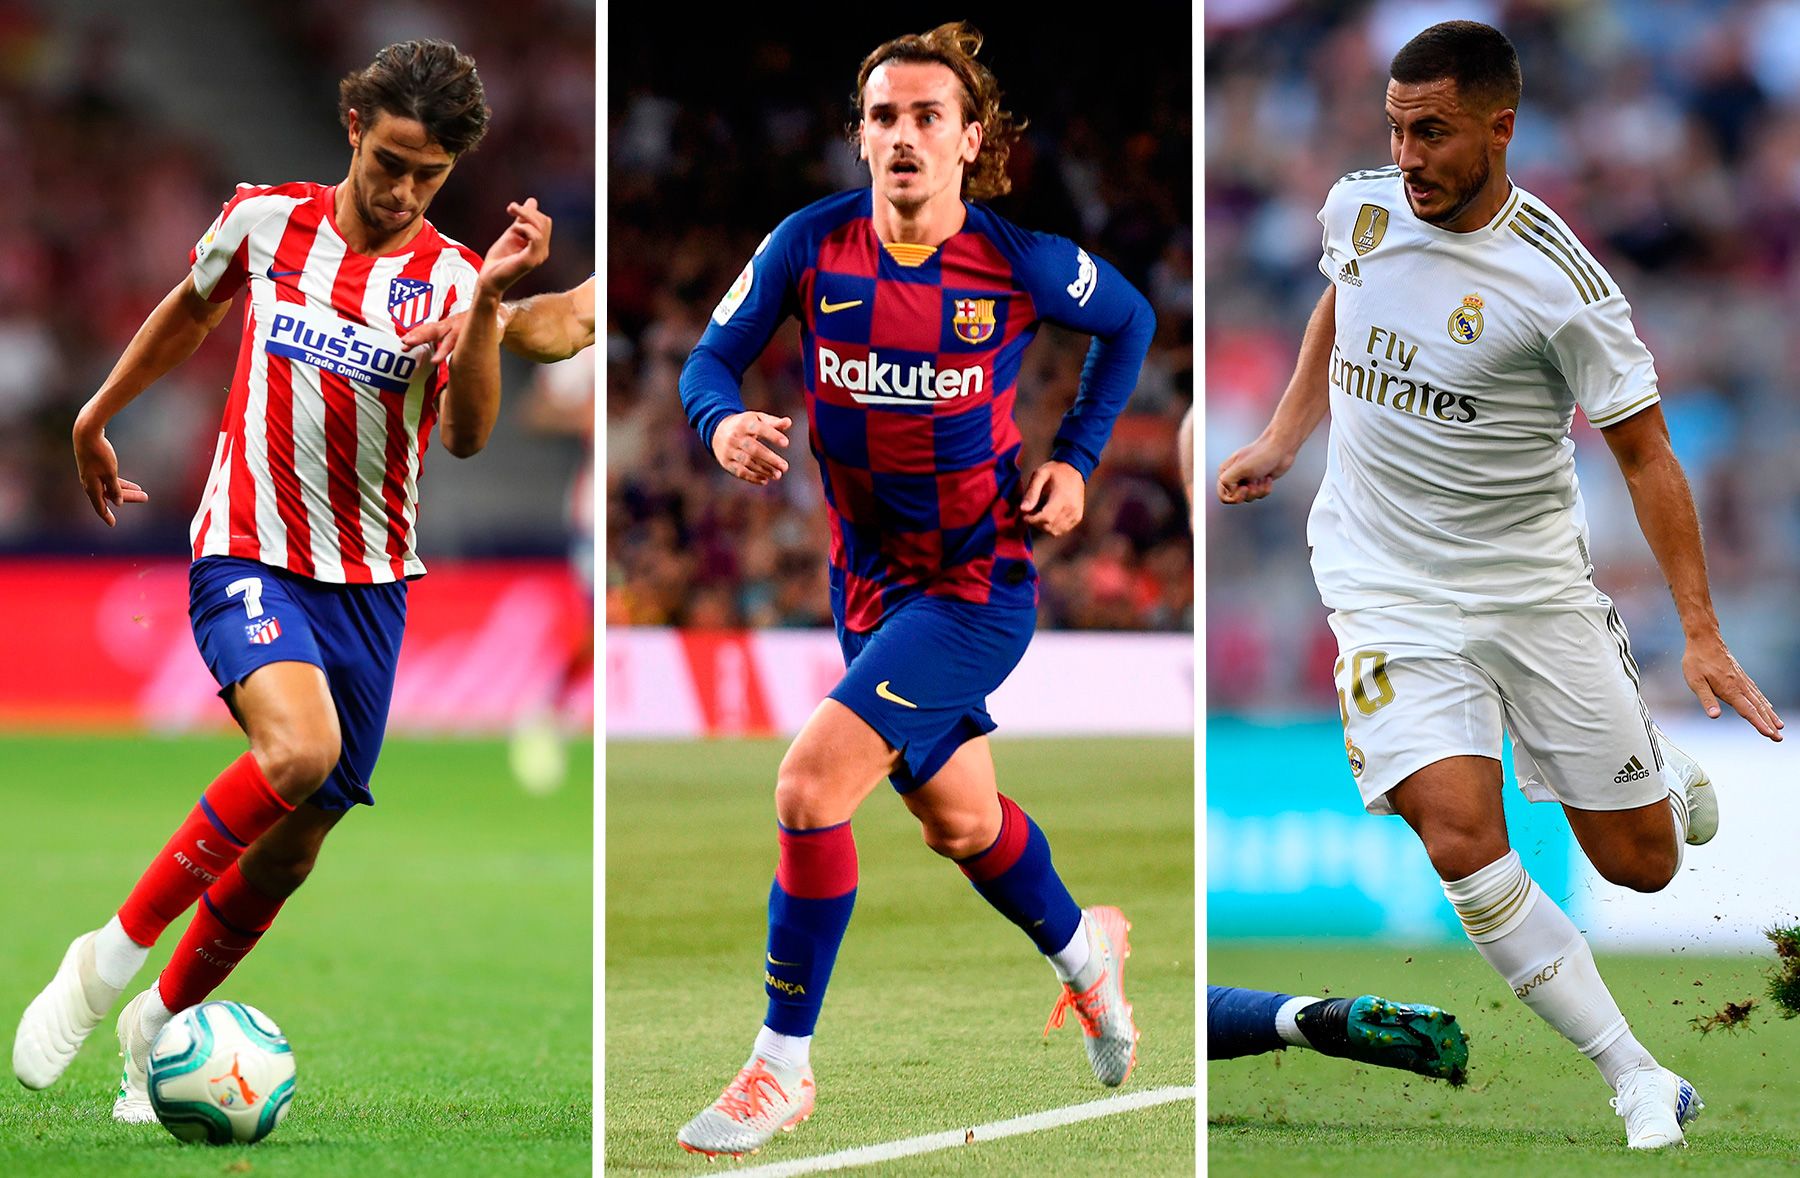 Joao Félix, Griezmann and Hazard, some of the most expensive signings of the summer